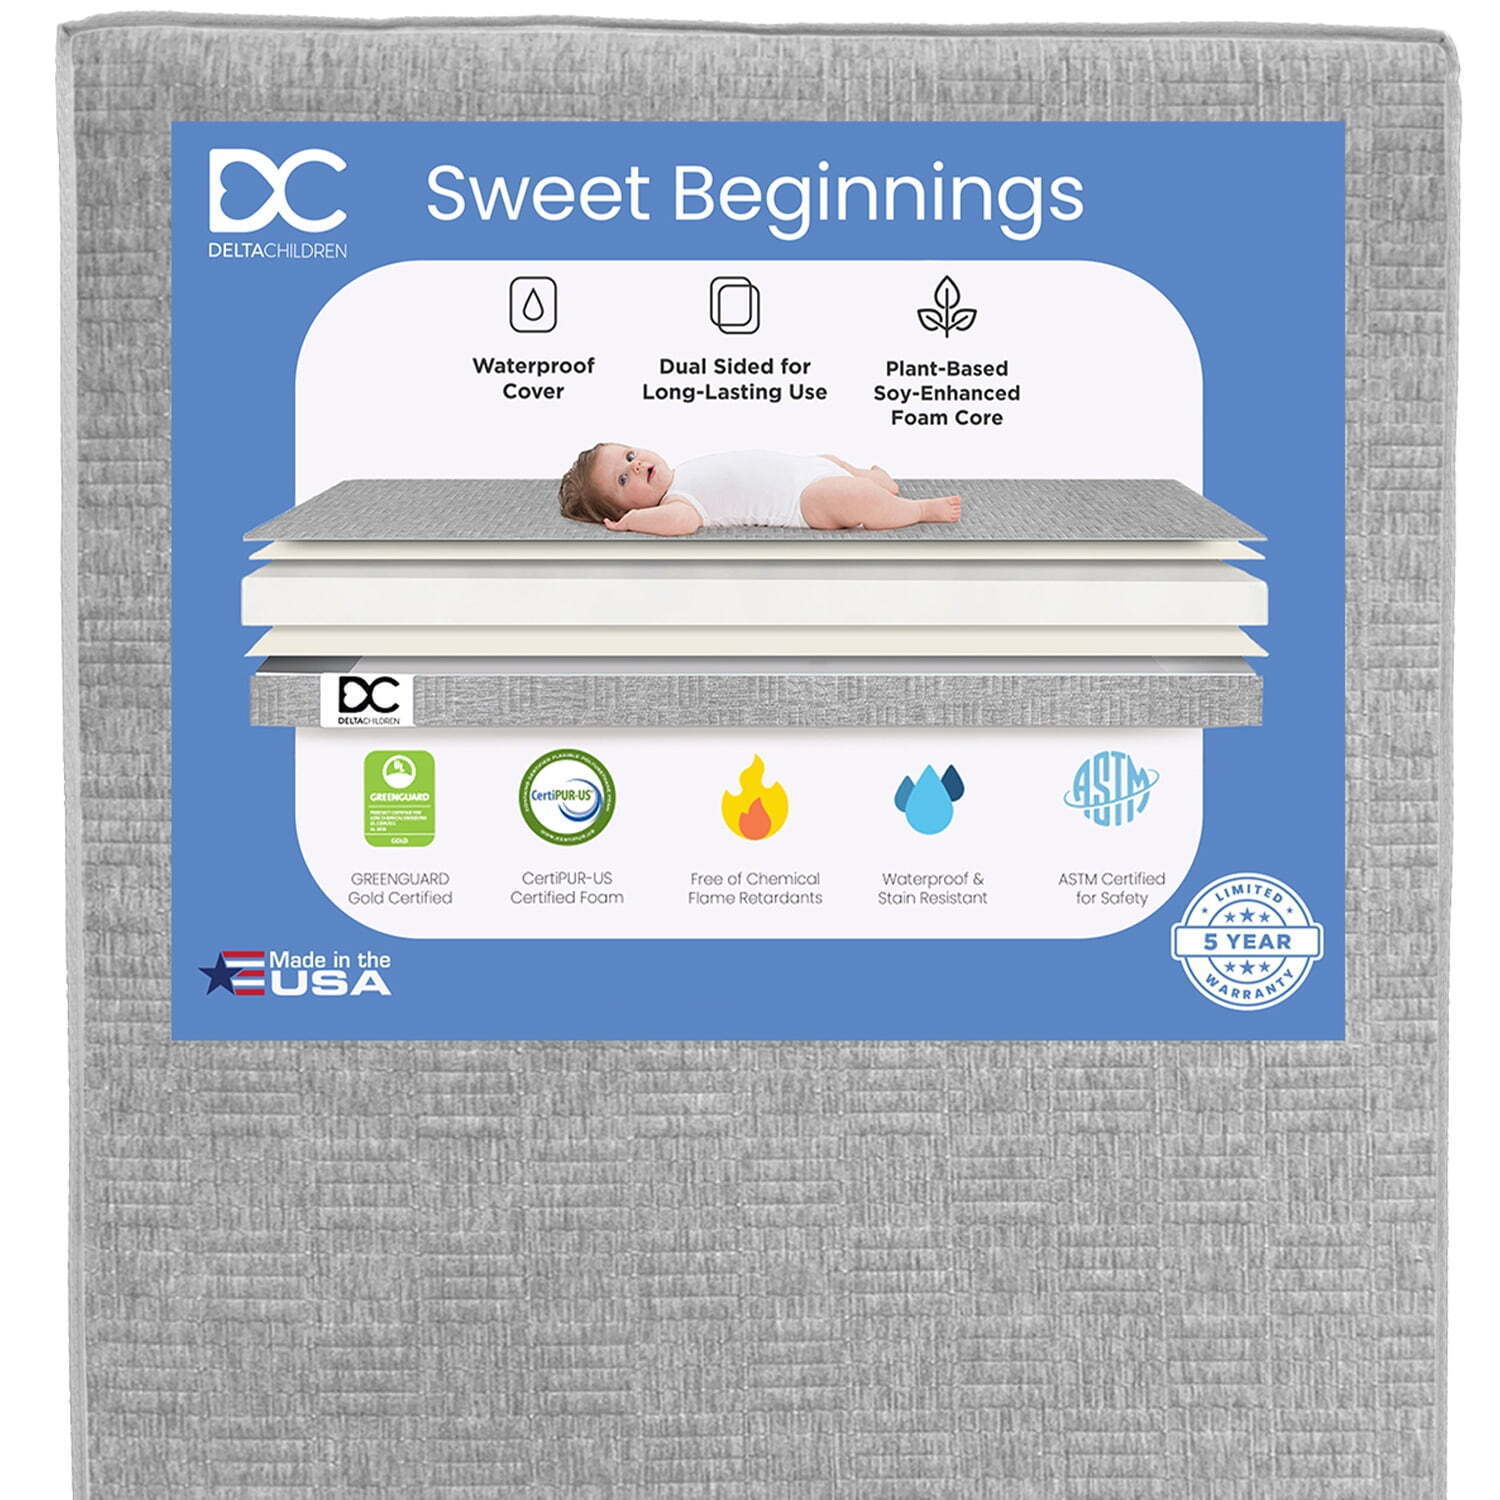 Delta Children Sweet Beginnings Mattress for Toddler Bed, Baby Crib or Baby Bed, - $107.40